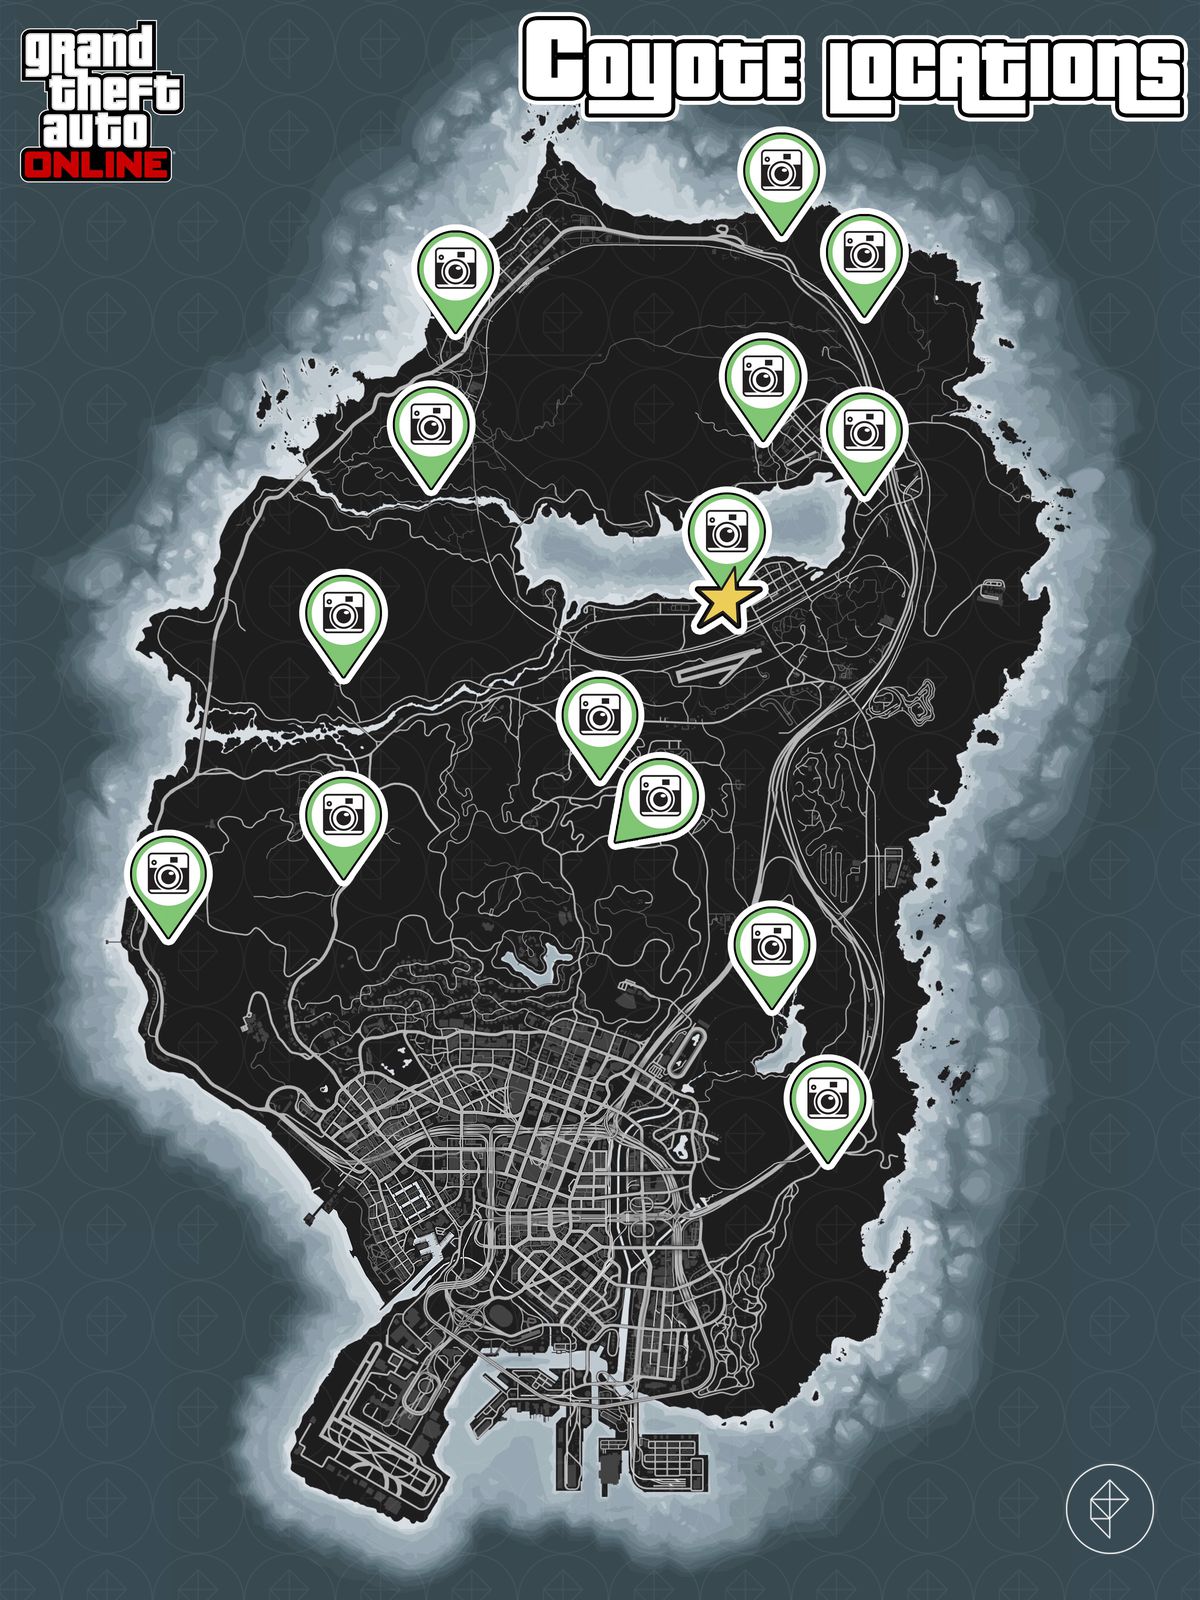 GTA Online map with coyote locations